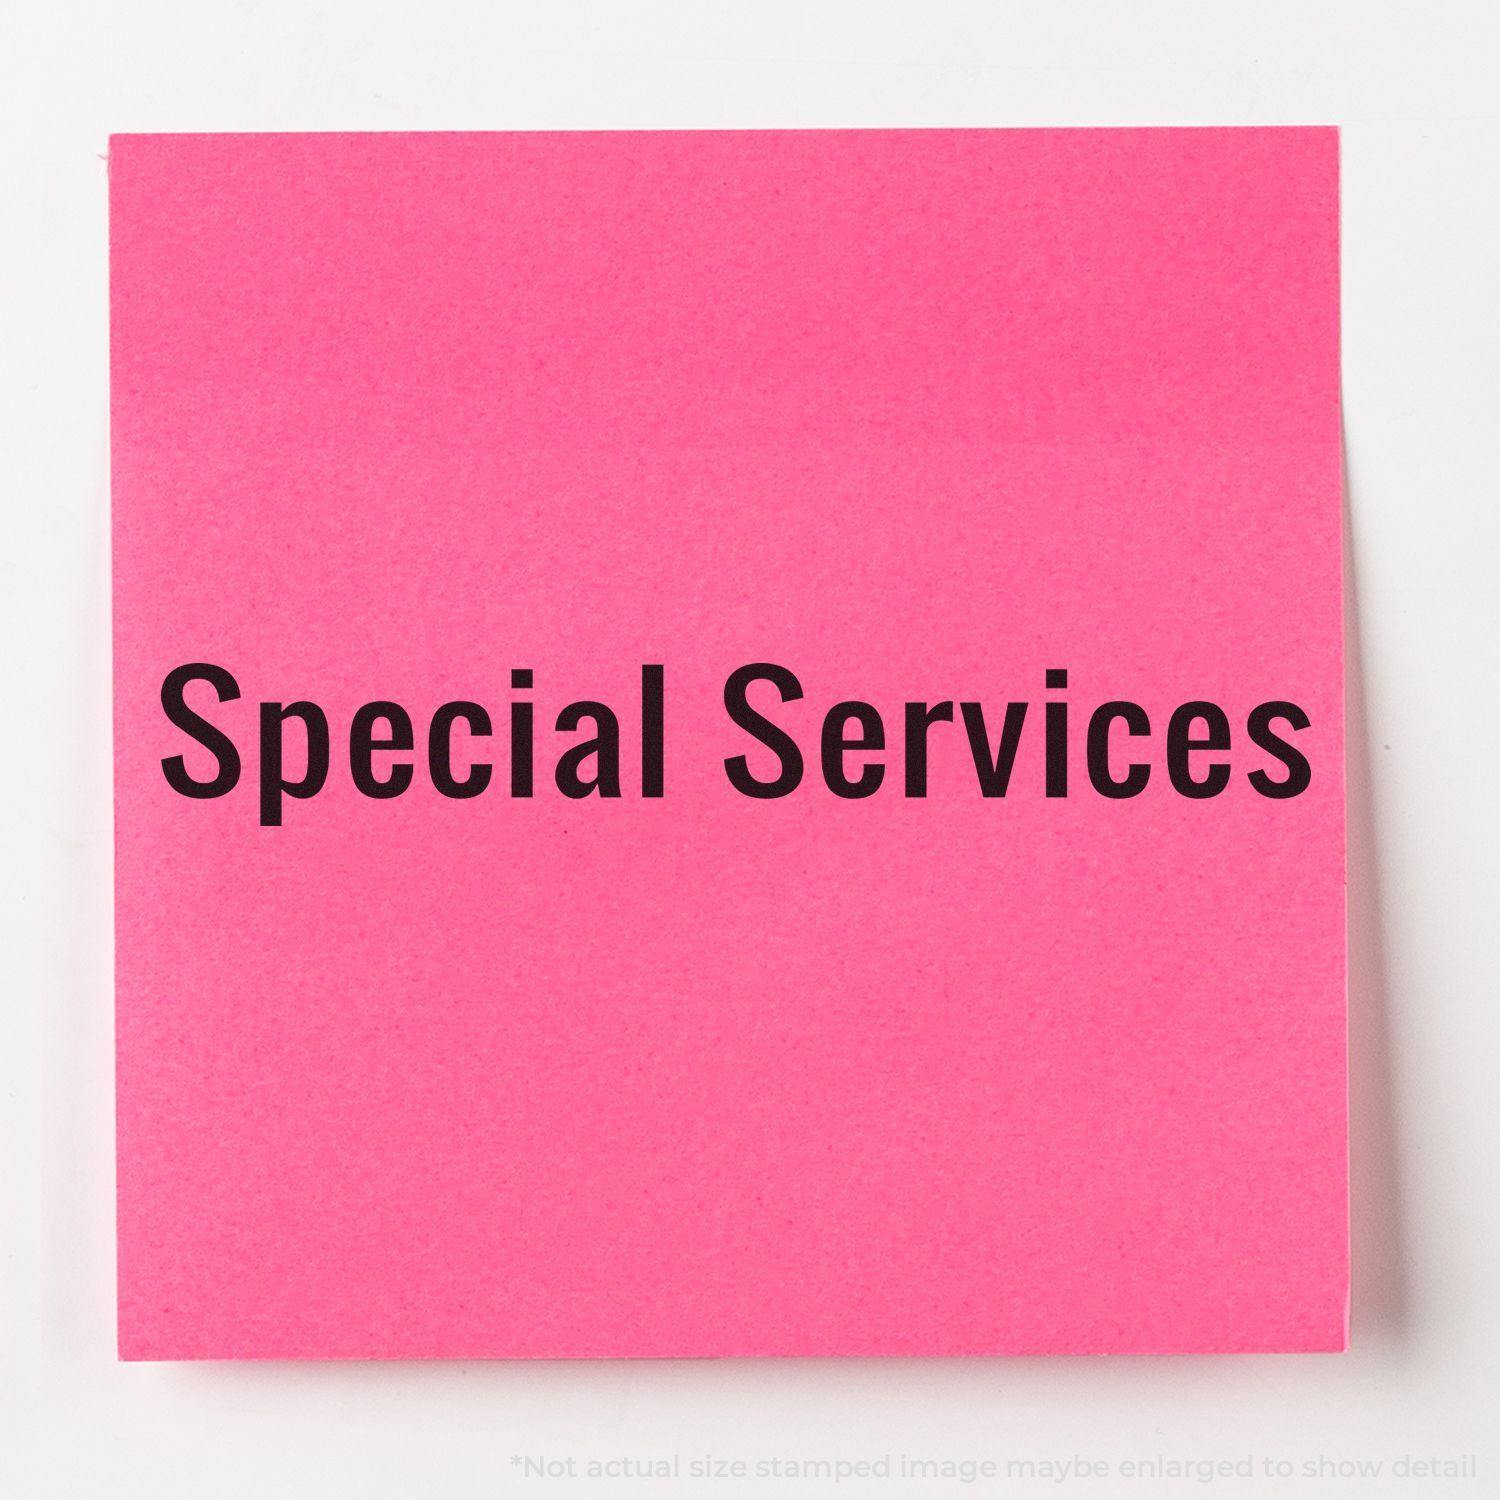 A self-inking stamp with a stamped image showing how the text "Special Services" is displayed after stamping.